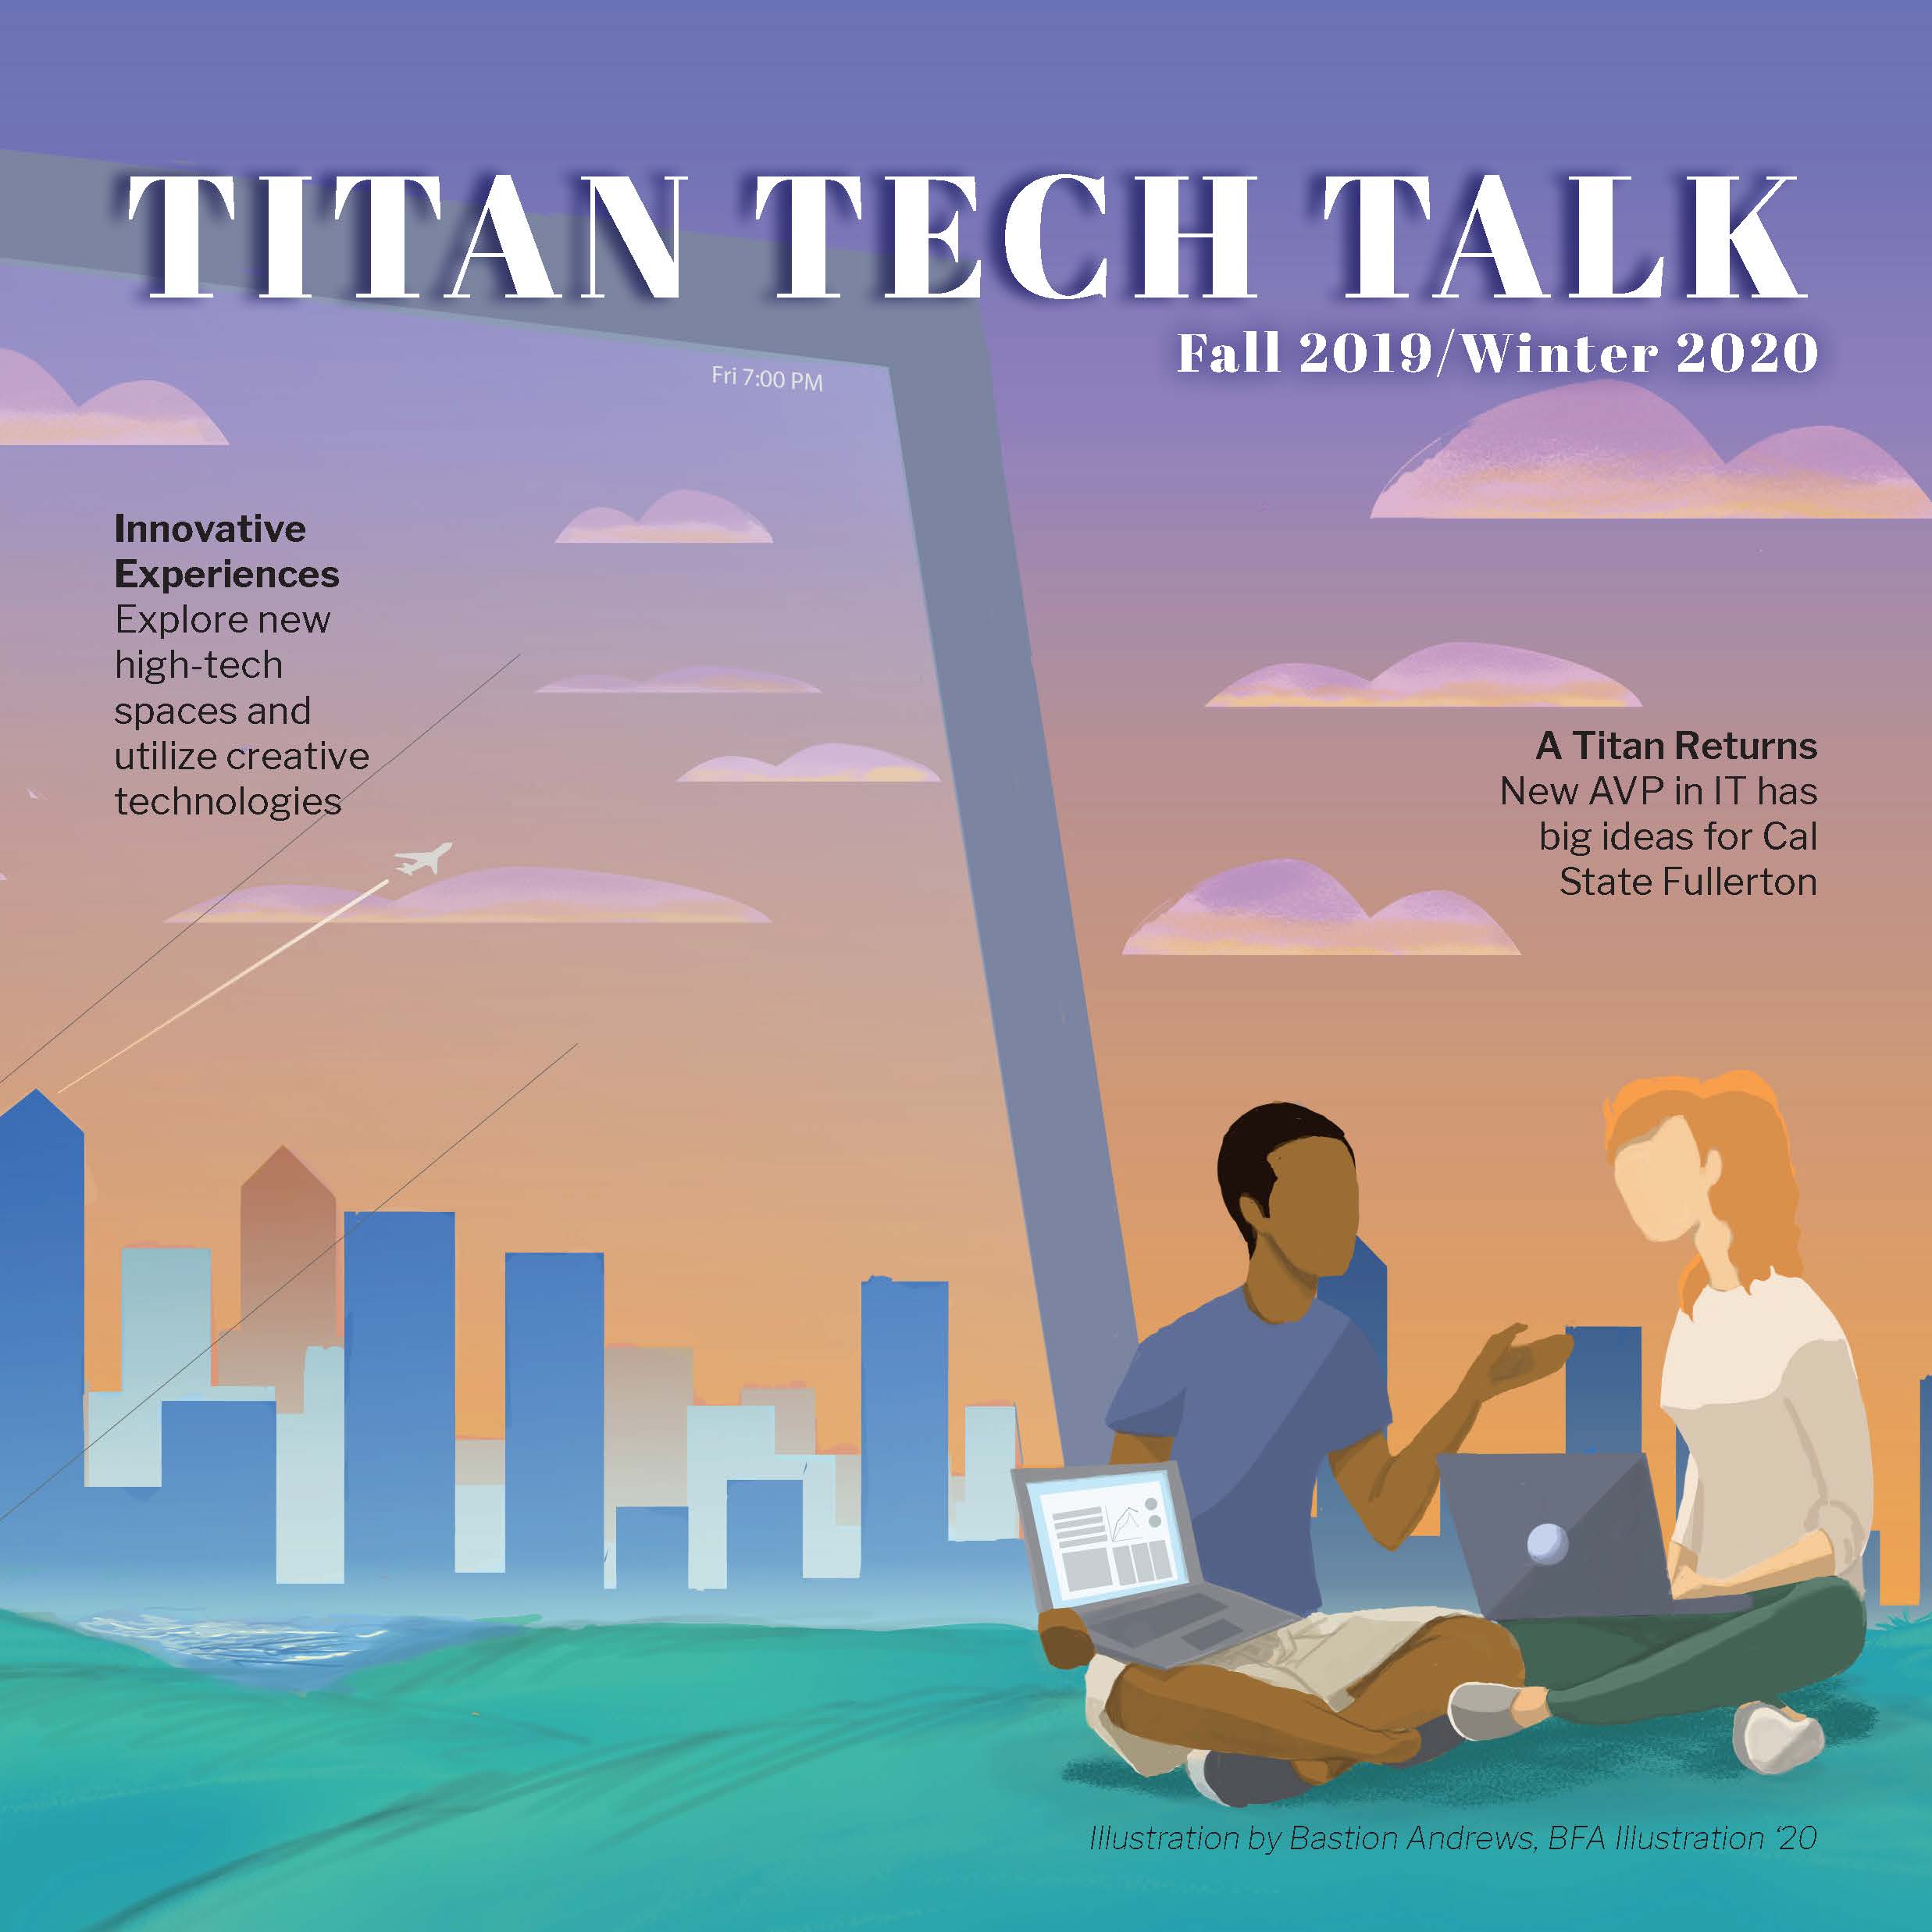 Cover of Titan Tech Talk Innovation Issue